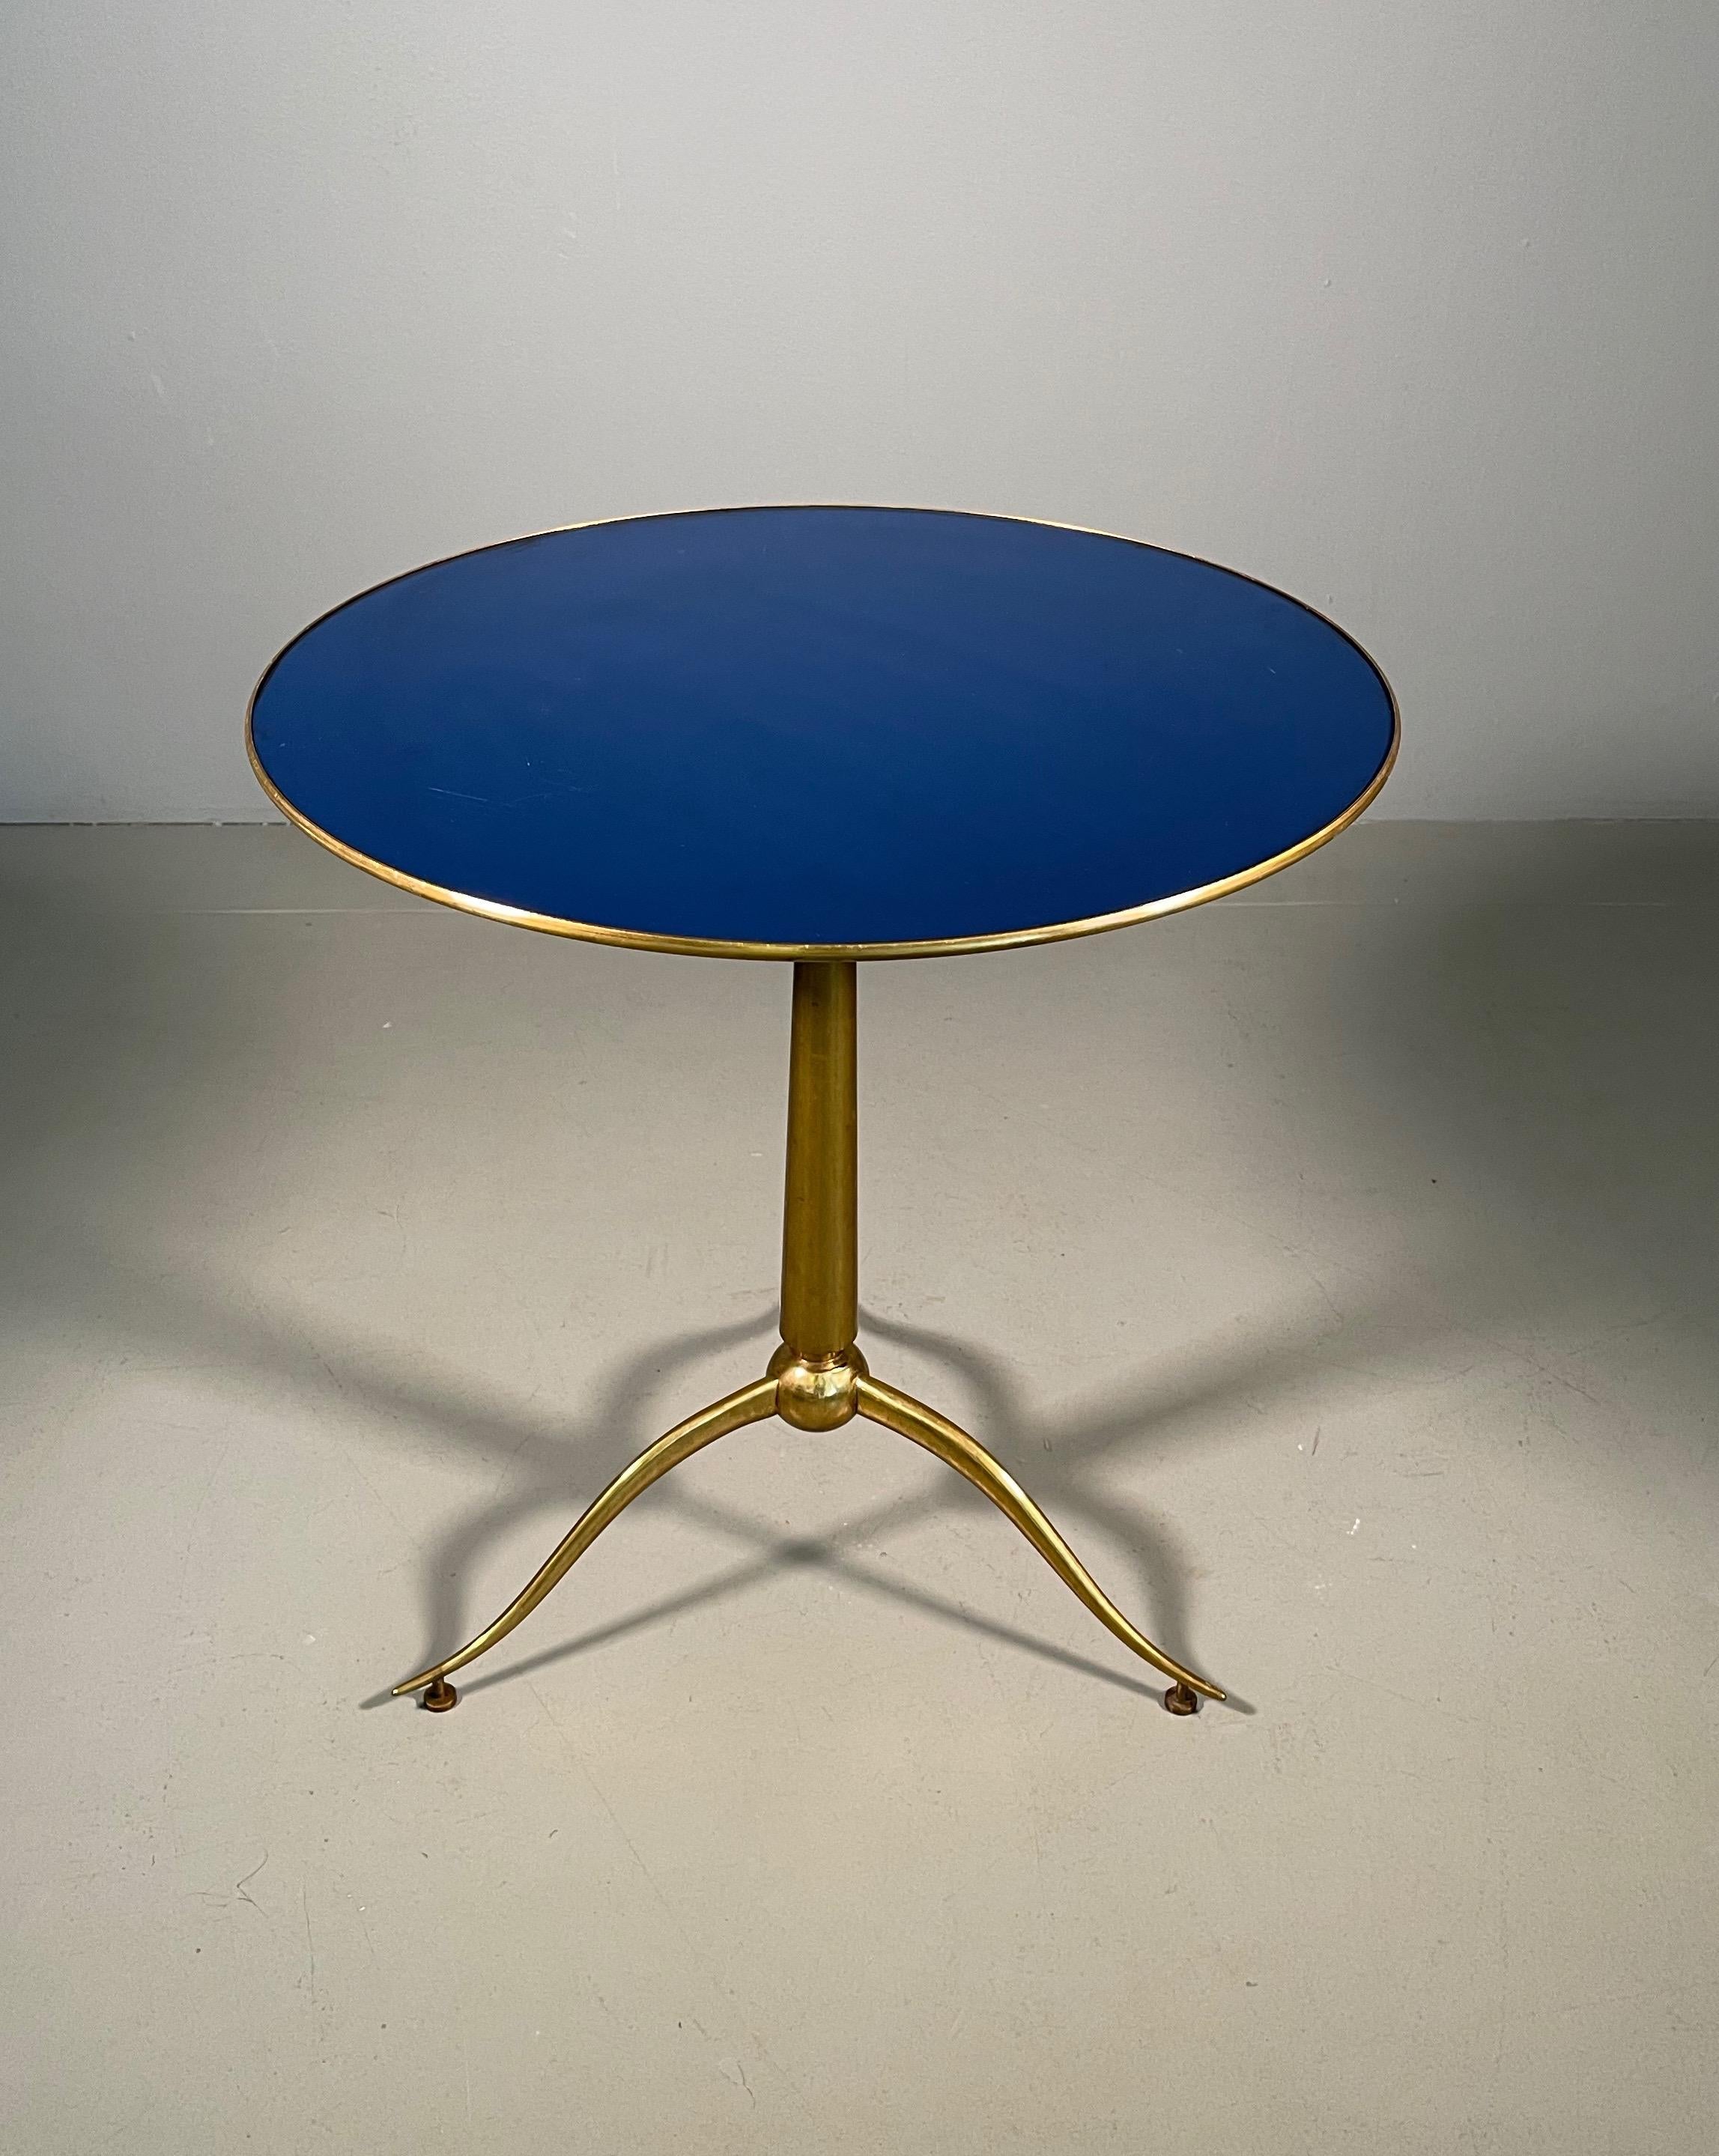 Rareof stunning round side tables with brass top and inset beveled blue glass on elegant brass tripod base, designed by Osvaldo Borsani and manufactured by Arredamenti Borsani Varedo, Milan, 1950s. 
Beautifully elegant lines and proportions in a